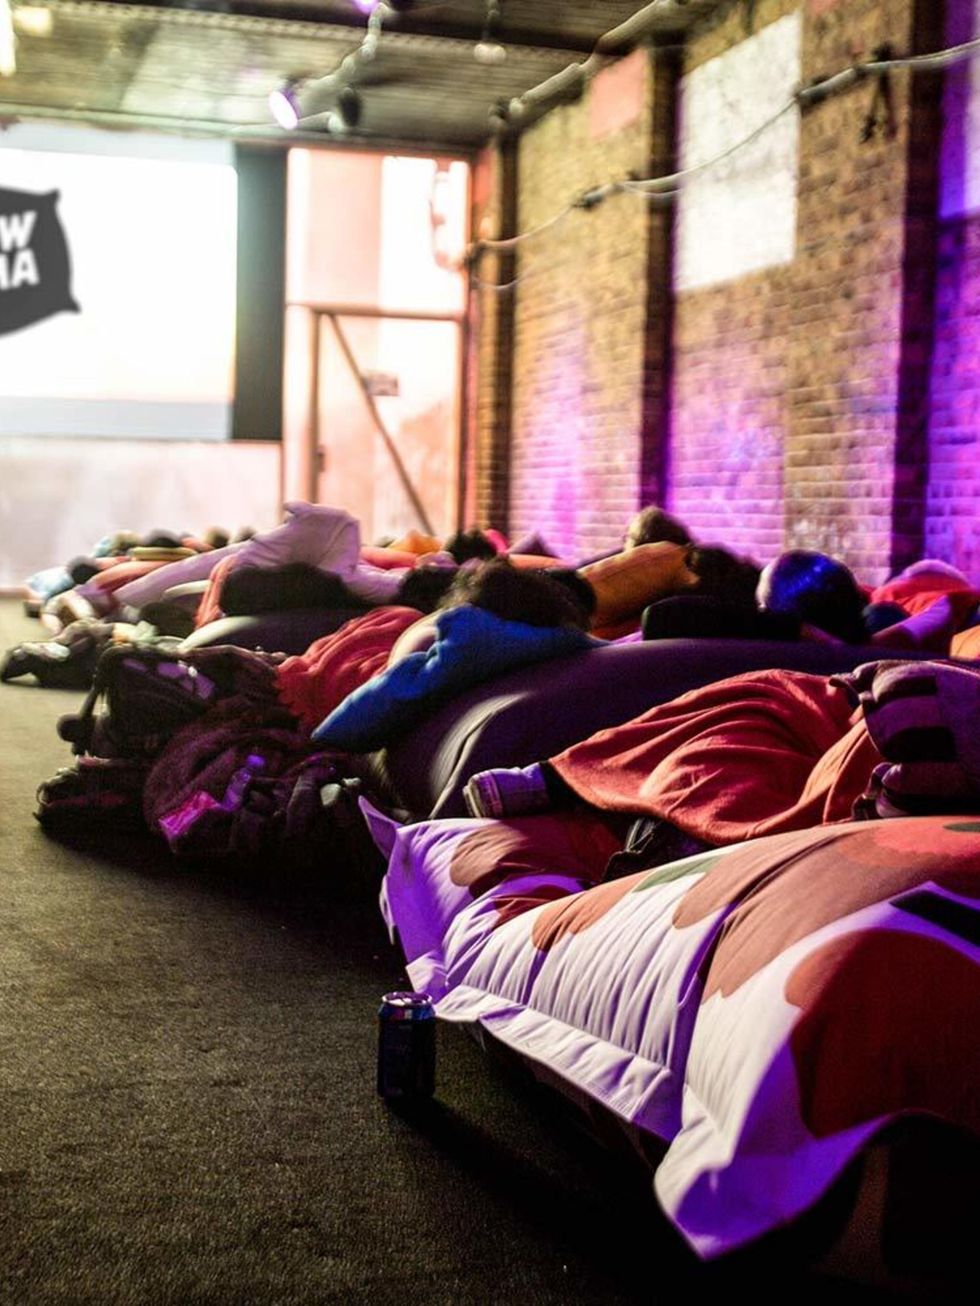 <p><strong>FILM: Pillow Cinema</strong></p>

<p>Pillow Cinema is operating a strict No Pillow, No Entry rule, so expect nothing less than extreme comfort. Seats consist of Fatboy beanbags and moviegoers can snuggle up and share one or stretch out by the